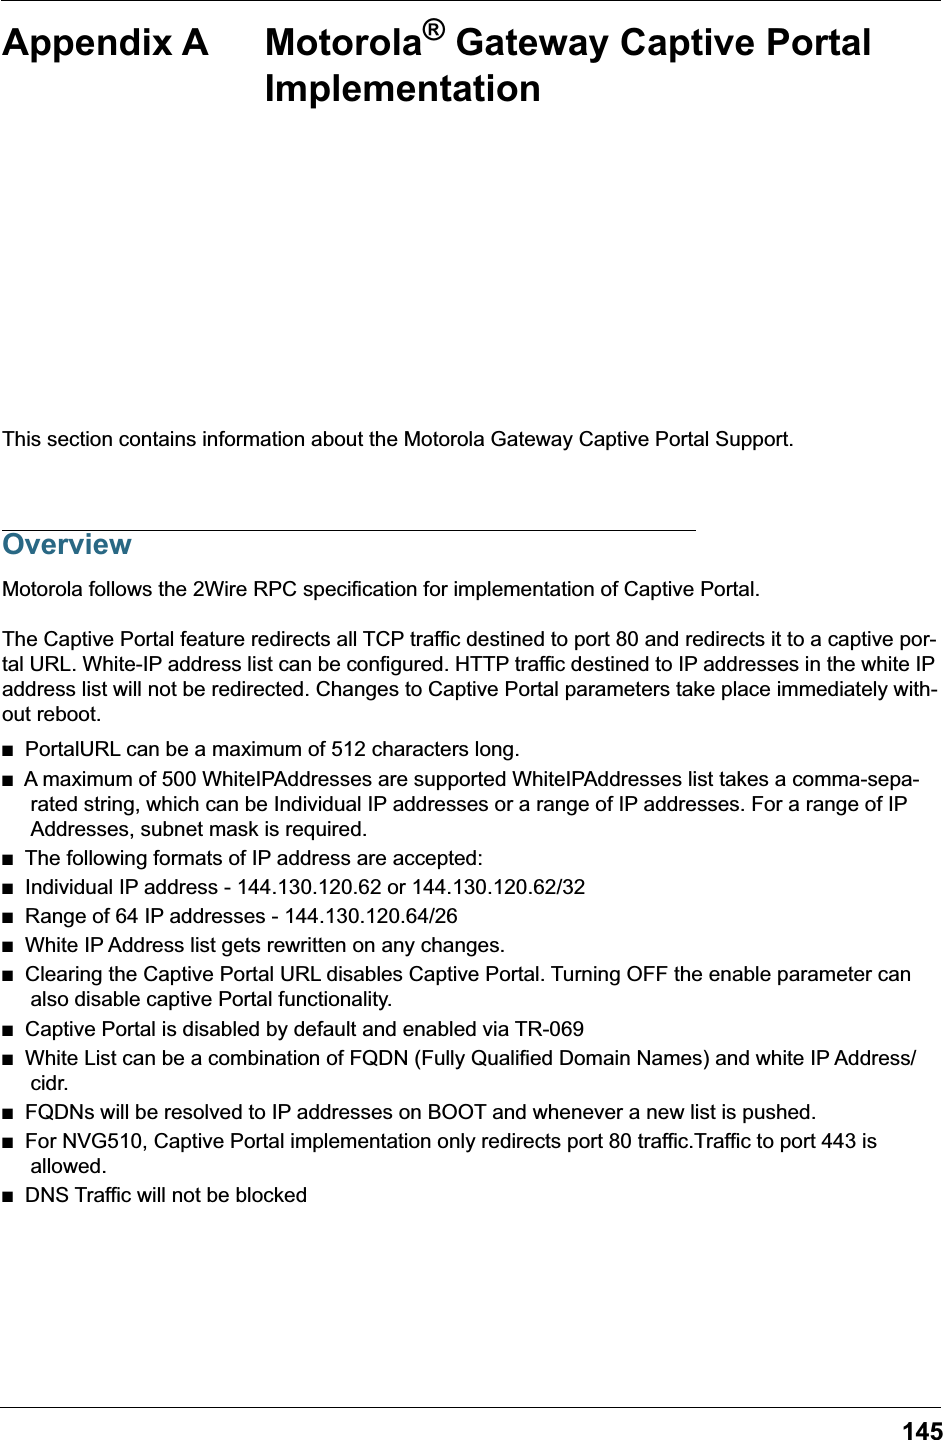 145Appendix A Motorola® Gateway Captive Portal ImplementationThis section contains information about the Motorola Gateway Captive Portal Support.OverviewMotorola follows the 2Wire RPC specification for implementation of Captive Portal.The Captive Portal feature redirects all TCP traffic destined to port 80 and redirects it to a captive por-tal URL. White-IP address list can be configured. HTTP traffic destined to IP addresses in the white IP address list will not be redirected. Changes to Captive Portal parameters take place immediately with-out reboot.■   PortalURL can be a maximum of 512 characters long. ■   A maximum of 500 WhiteIPAddresses are supported WhiteIPAddresses list takes a comma-sepa-rated string, which can be Individual IP addresses or a range of IP addresses. For a range of IP Addresses, subnet mask is required.  ■   The following formats of IP address are accepted:■   Individual IP address - 144.130.120.62 or 144.130.120.62/32■   Range of 64 IP addresses - 144.130.120.64/26 ■   White IP Address list gets rewritten on any changes. ■   Clearing the Captive Portal URL disables Captive Portal. Turning OFF the enable parameter can also disable captive Portal functionality.■   Captive Portal is disabled by default and enabled via TR-069■   White List can be a combination of FQDN (Fully Qualified Domain Names) and white IP Address/cidr.■   FQDNs will be resolved to IP addresses on BOOT and whenever a new list is pushed.■   For NVG510, Captive Portal implementation only redirects port 80 traffic.Traffic to port 443 is allowed.■   DNS Traffic will not be blocked